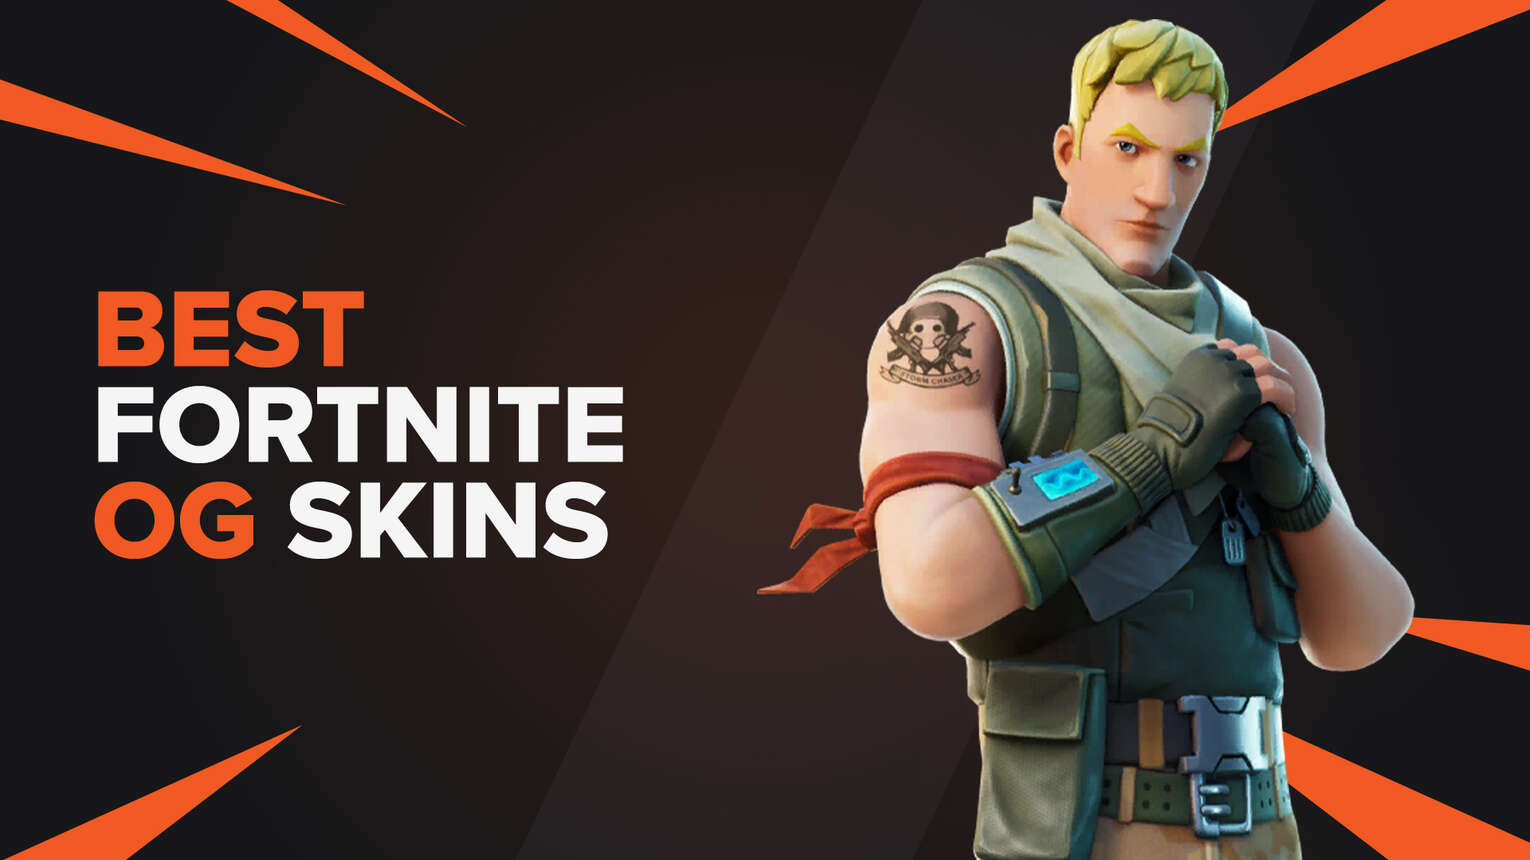 If You Own These Fortnite Skins, You Are OG!